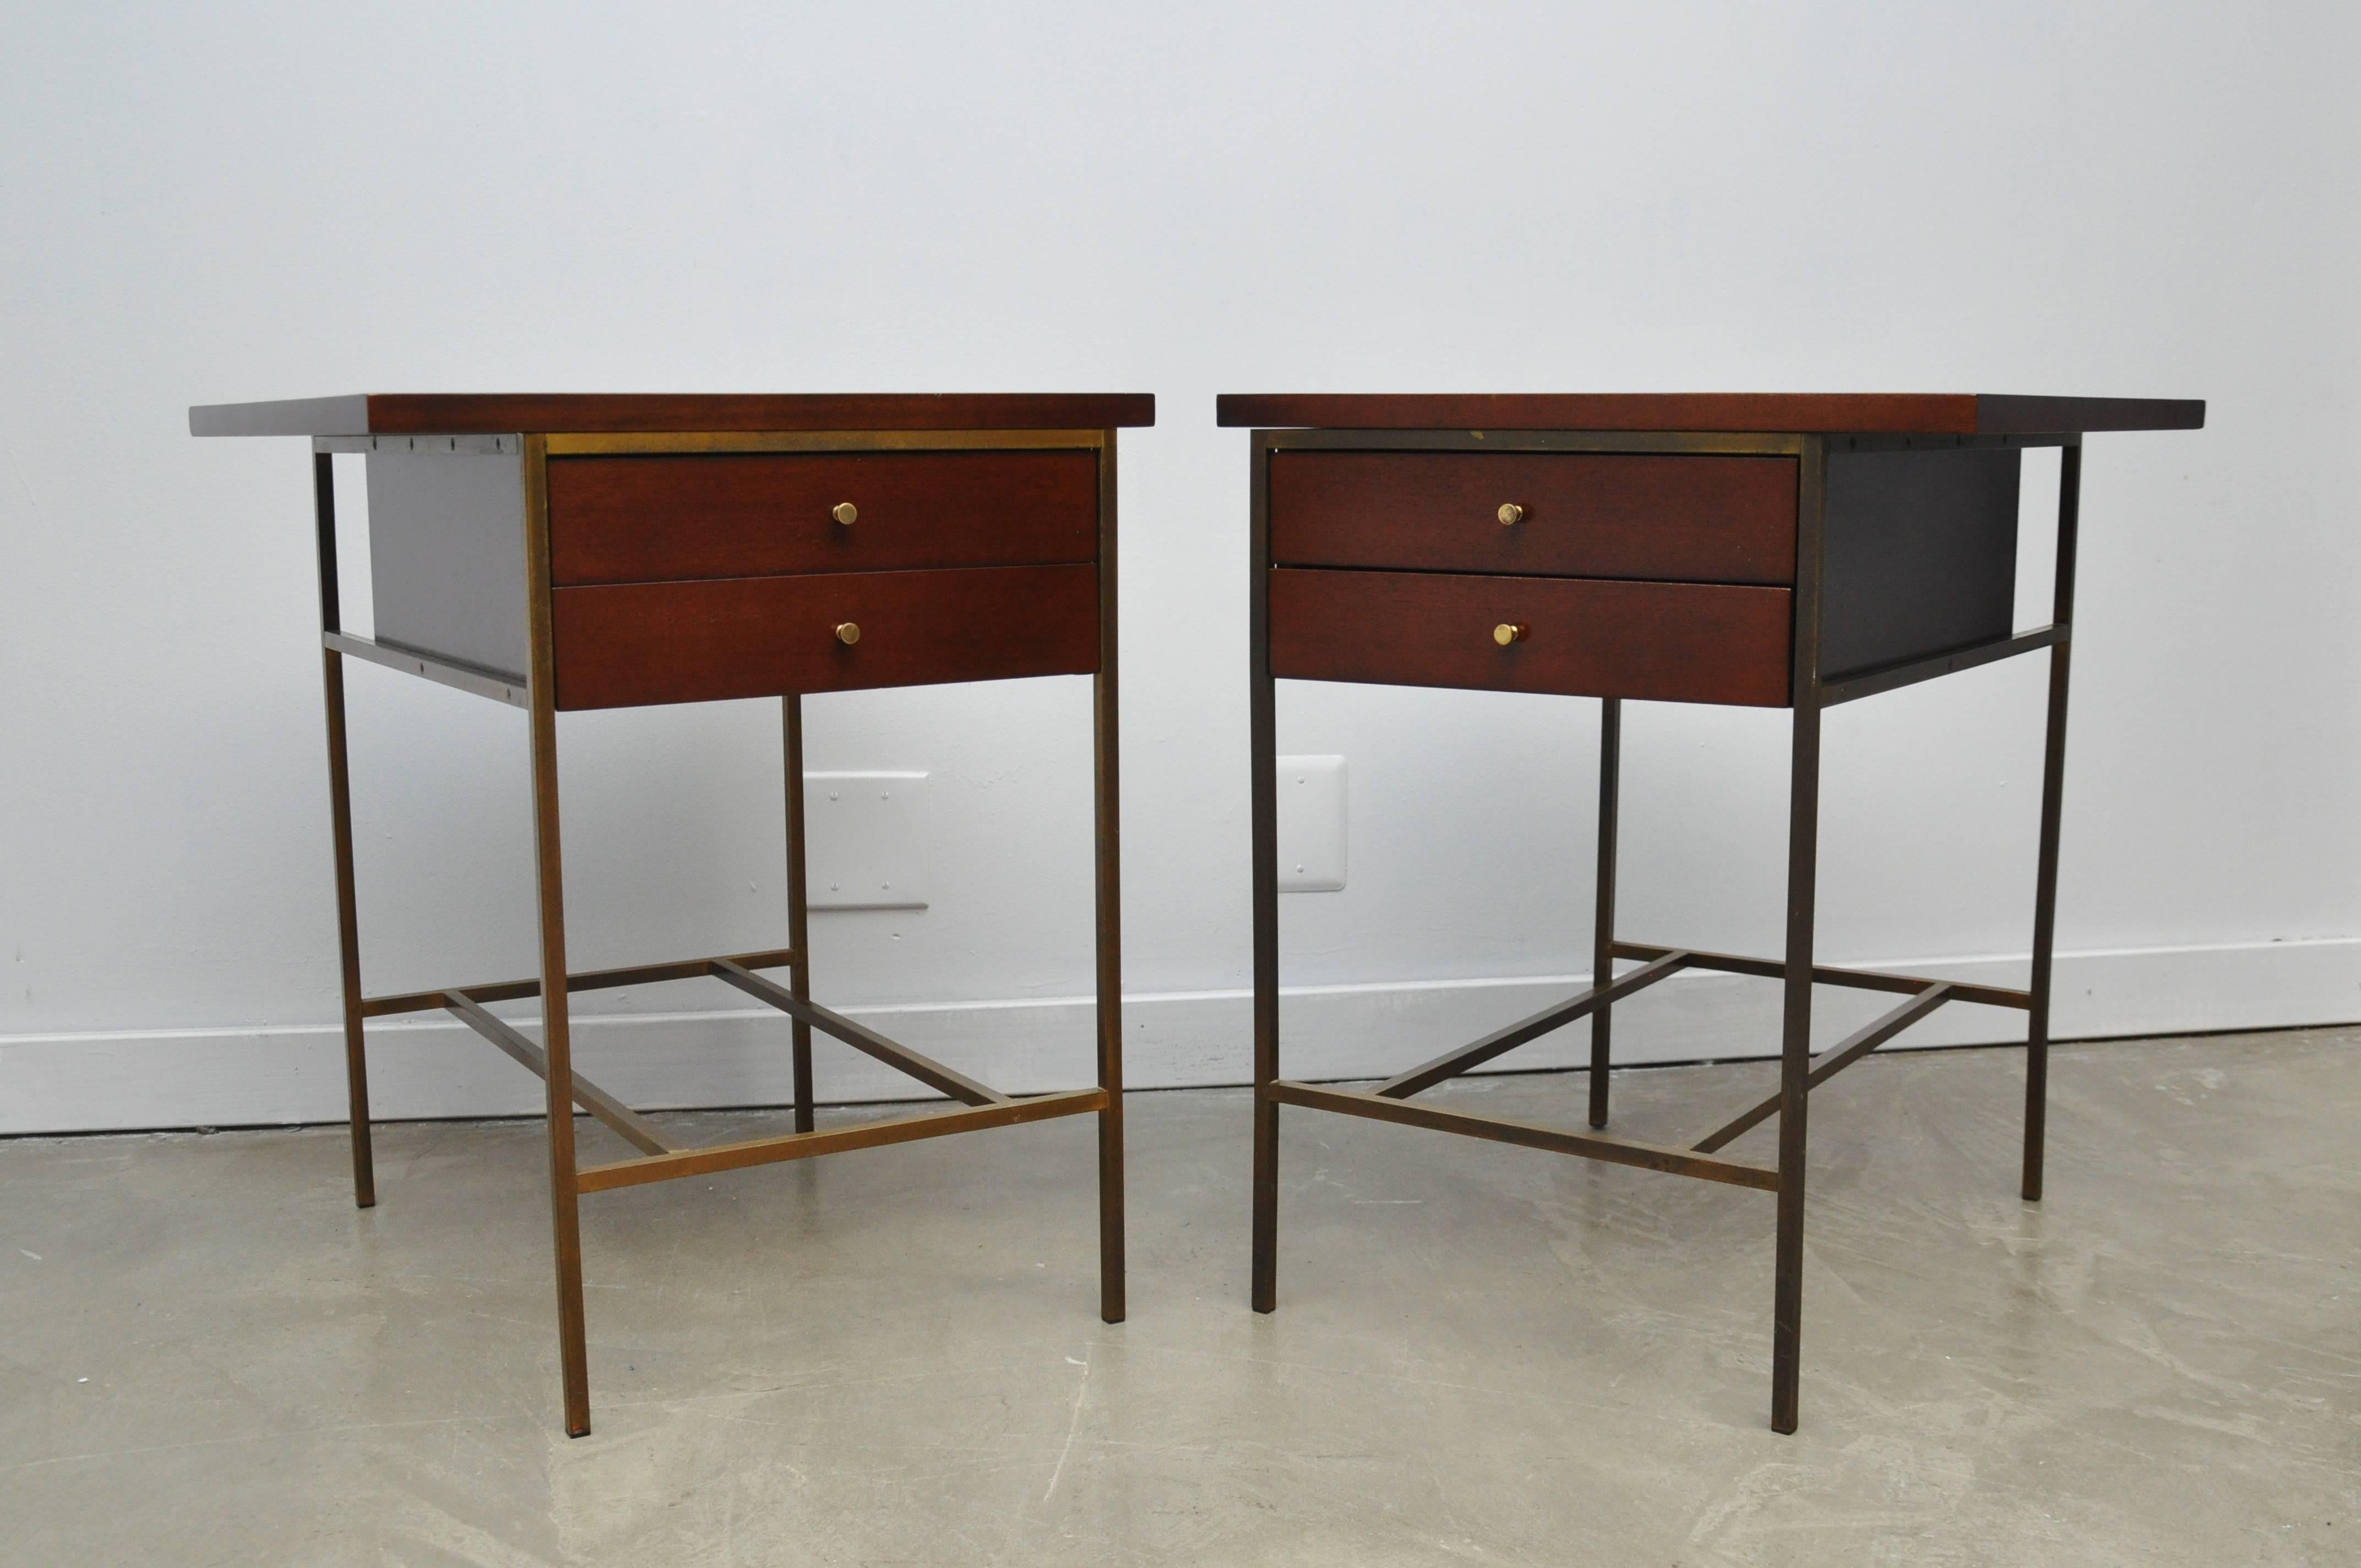 Pair of brass frame nightstands or end tables by Paul McCobb for Calvin furniture. Cases and tops have been fully restored/refinished. Nice original golden patina to brass.